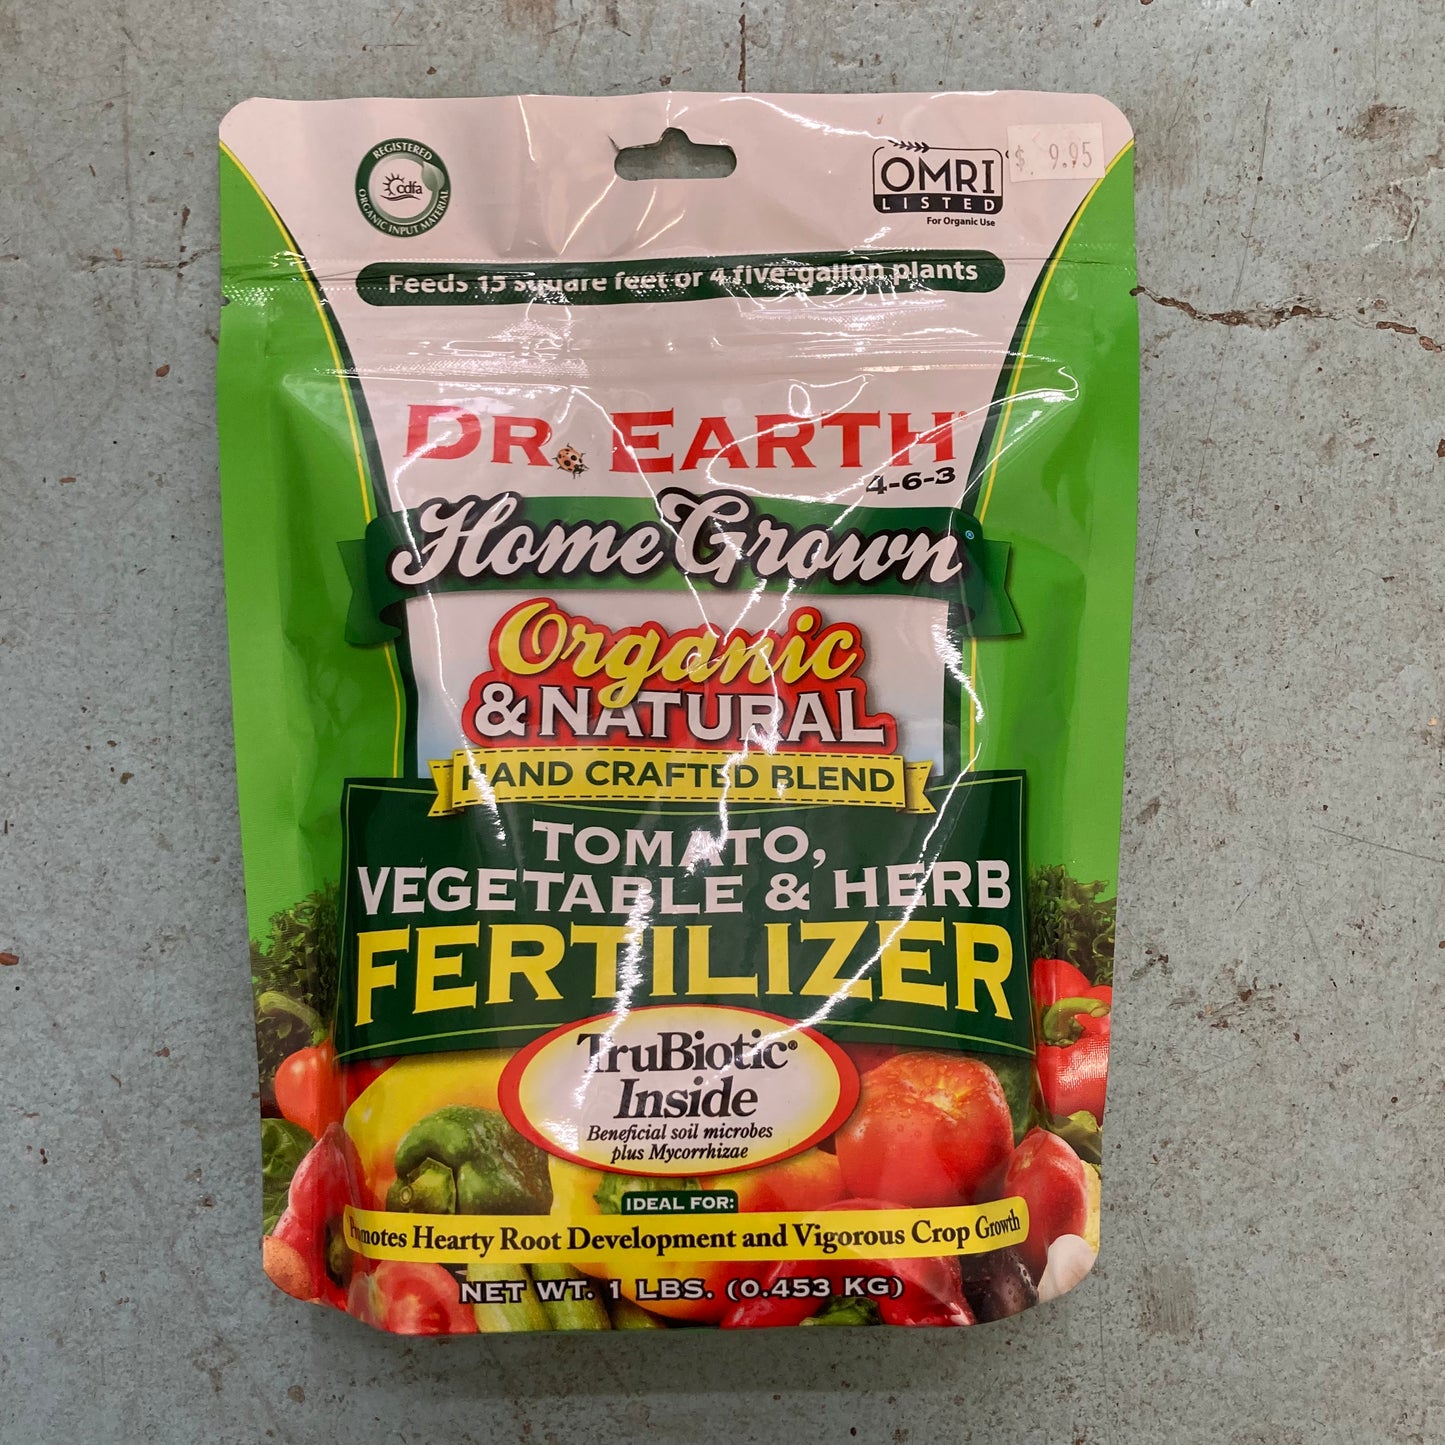 Dr. Earth Home Grown - Tomato, Vegetable, and Herb Fertilizer